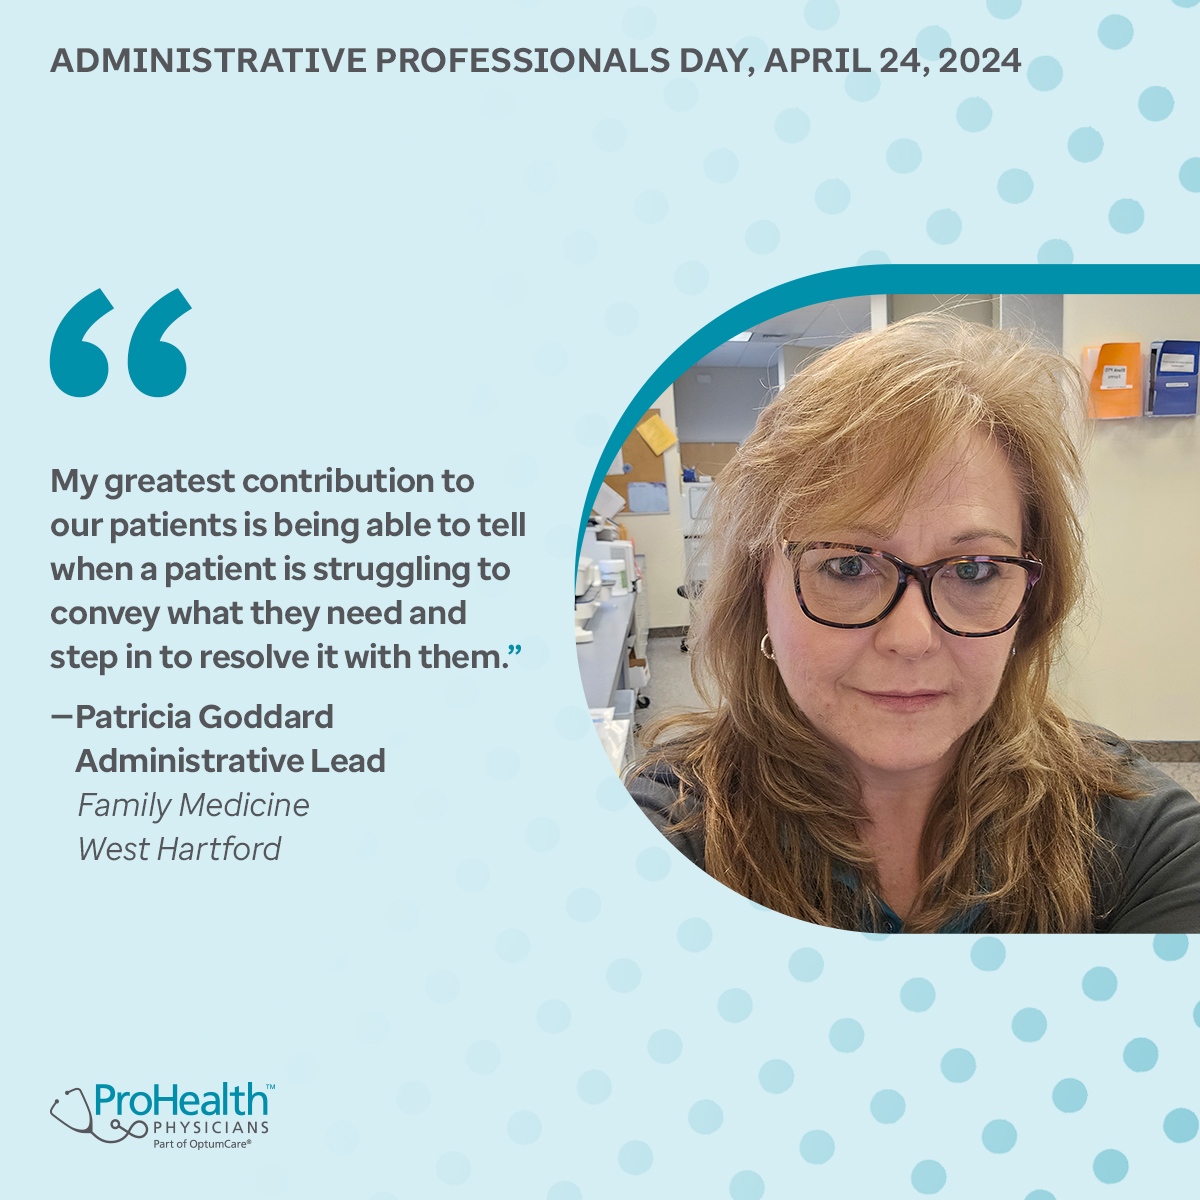 Today is #AdministrativeProfessionalDay! Our administrative professionals play a key role in our most important mission. They help to improve the lives of our patients. Check out what our Administrative Lead, Patricia Goddard, says her greatest contribution is to her patients...